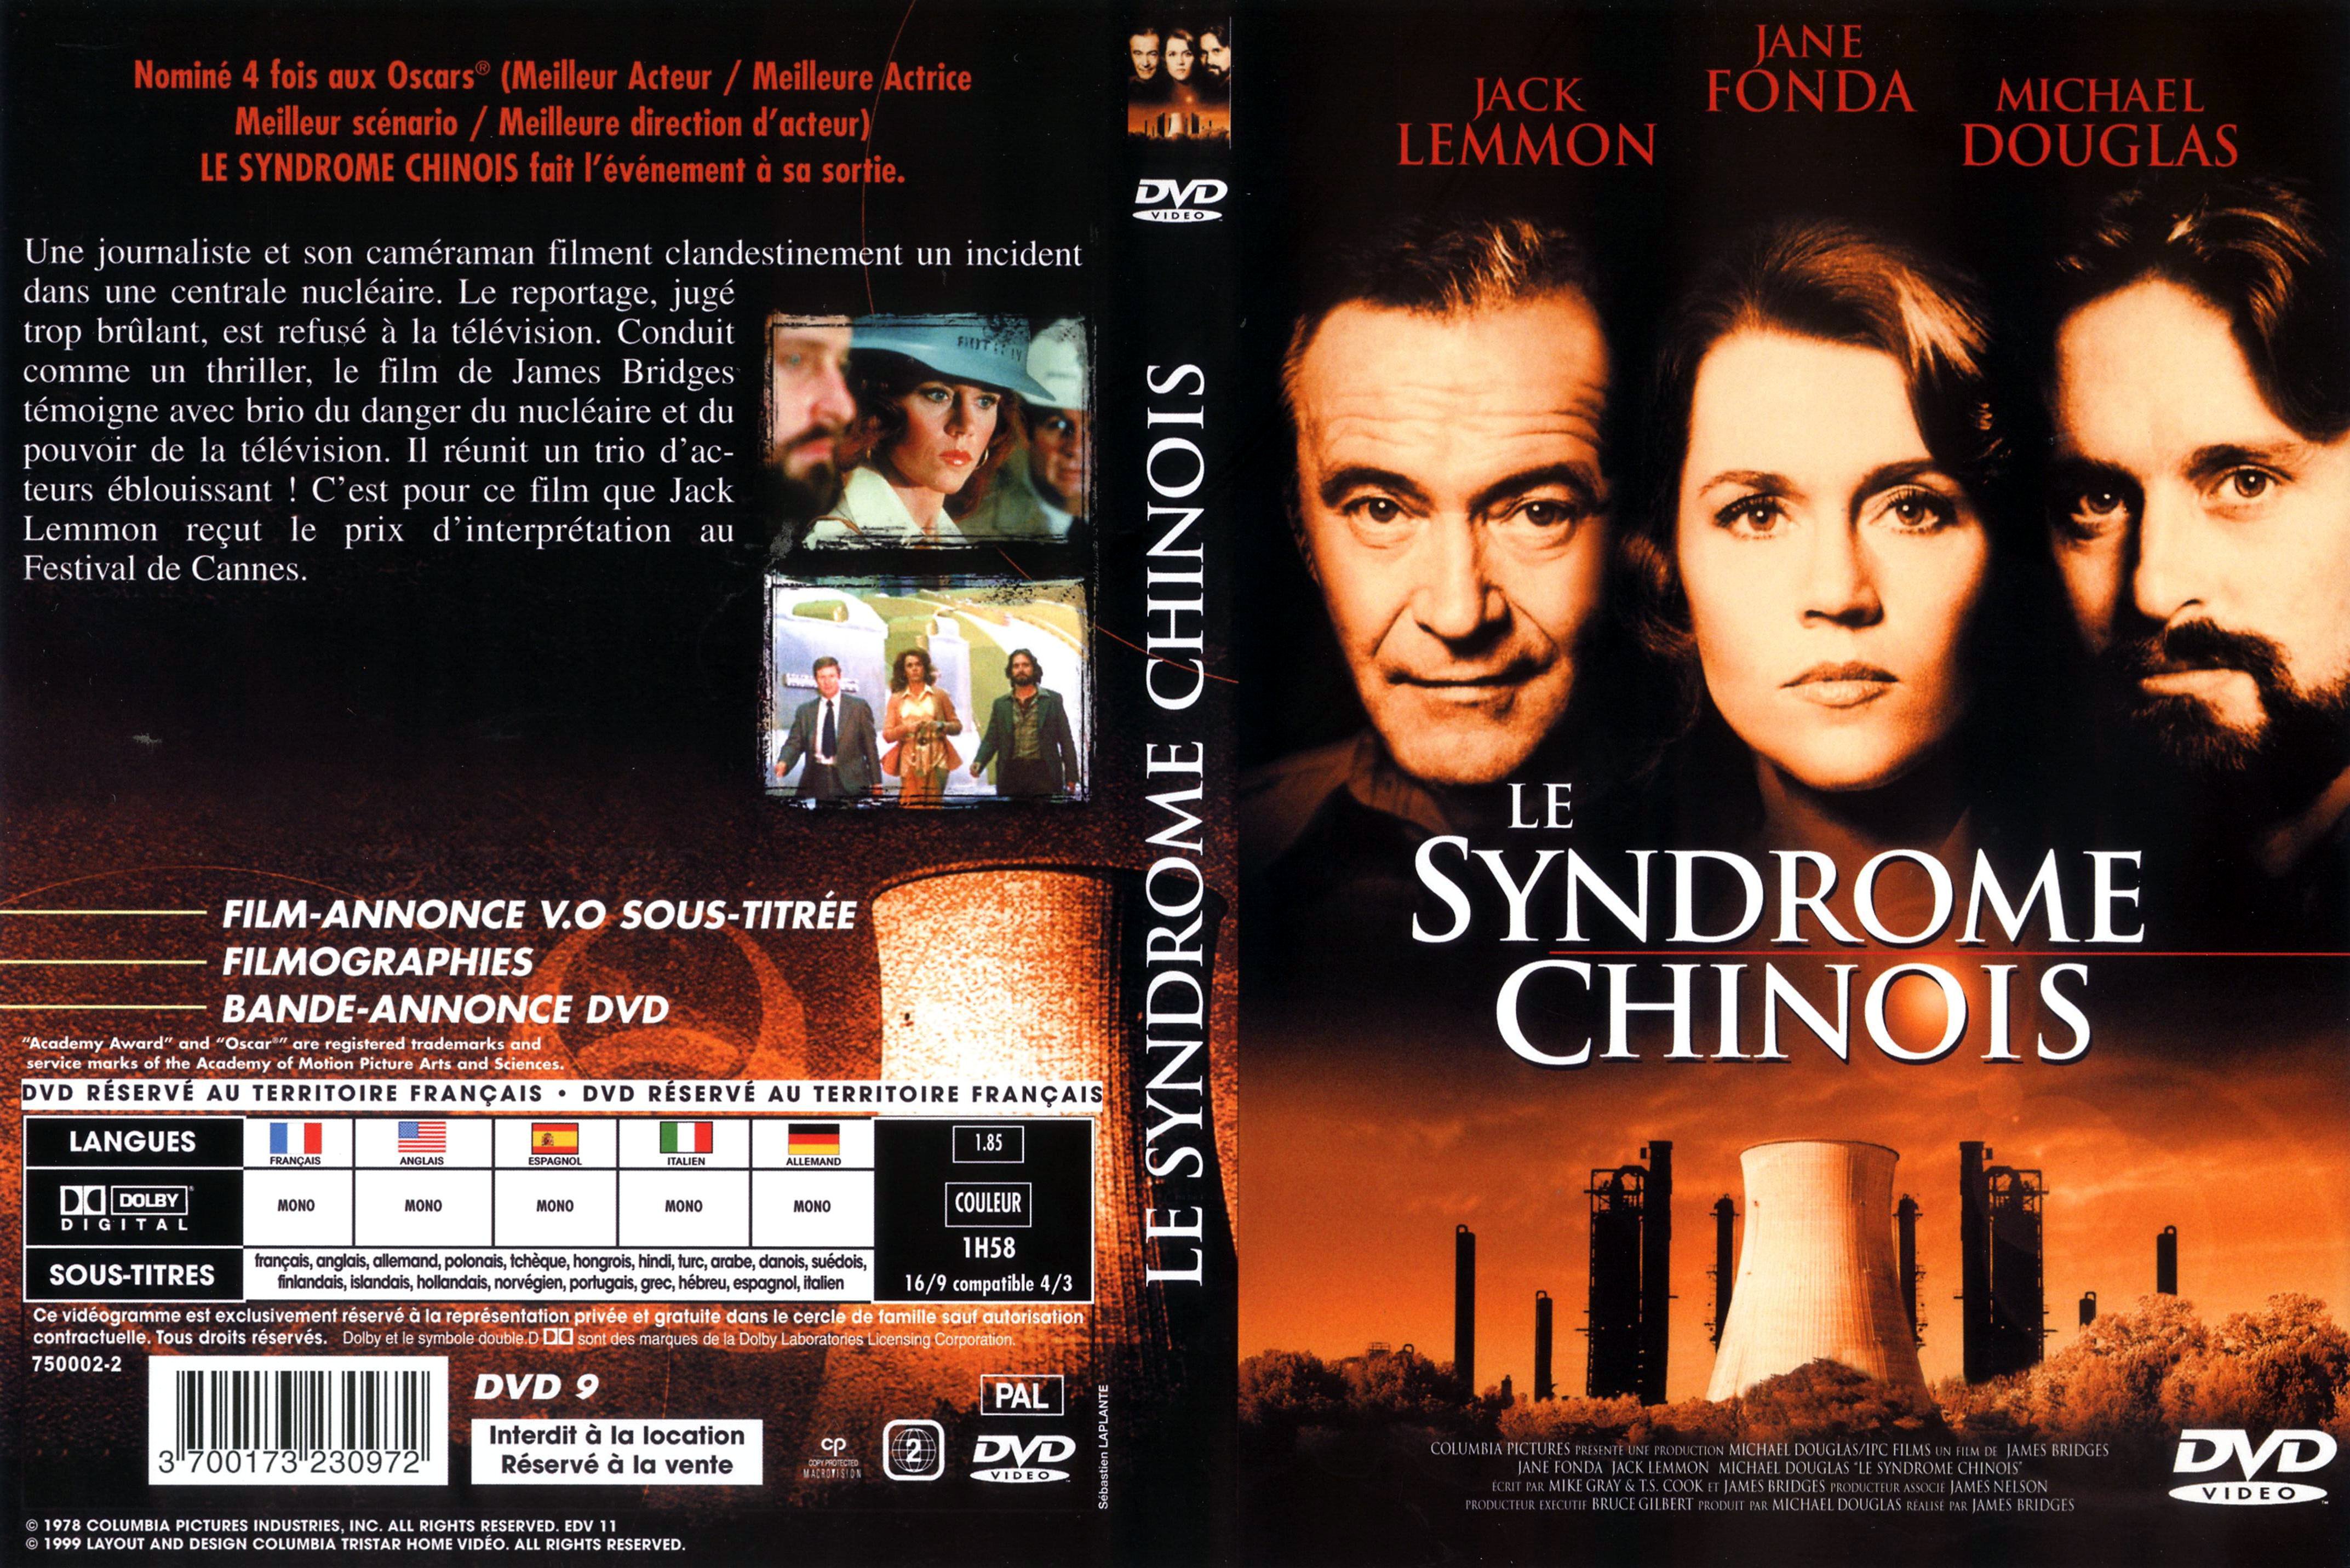 Jaquette DVD Le syndrome chinois v2